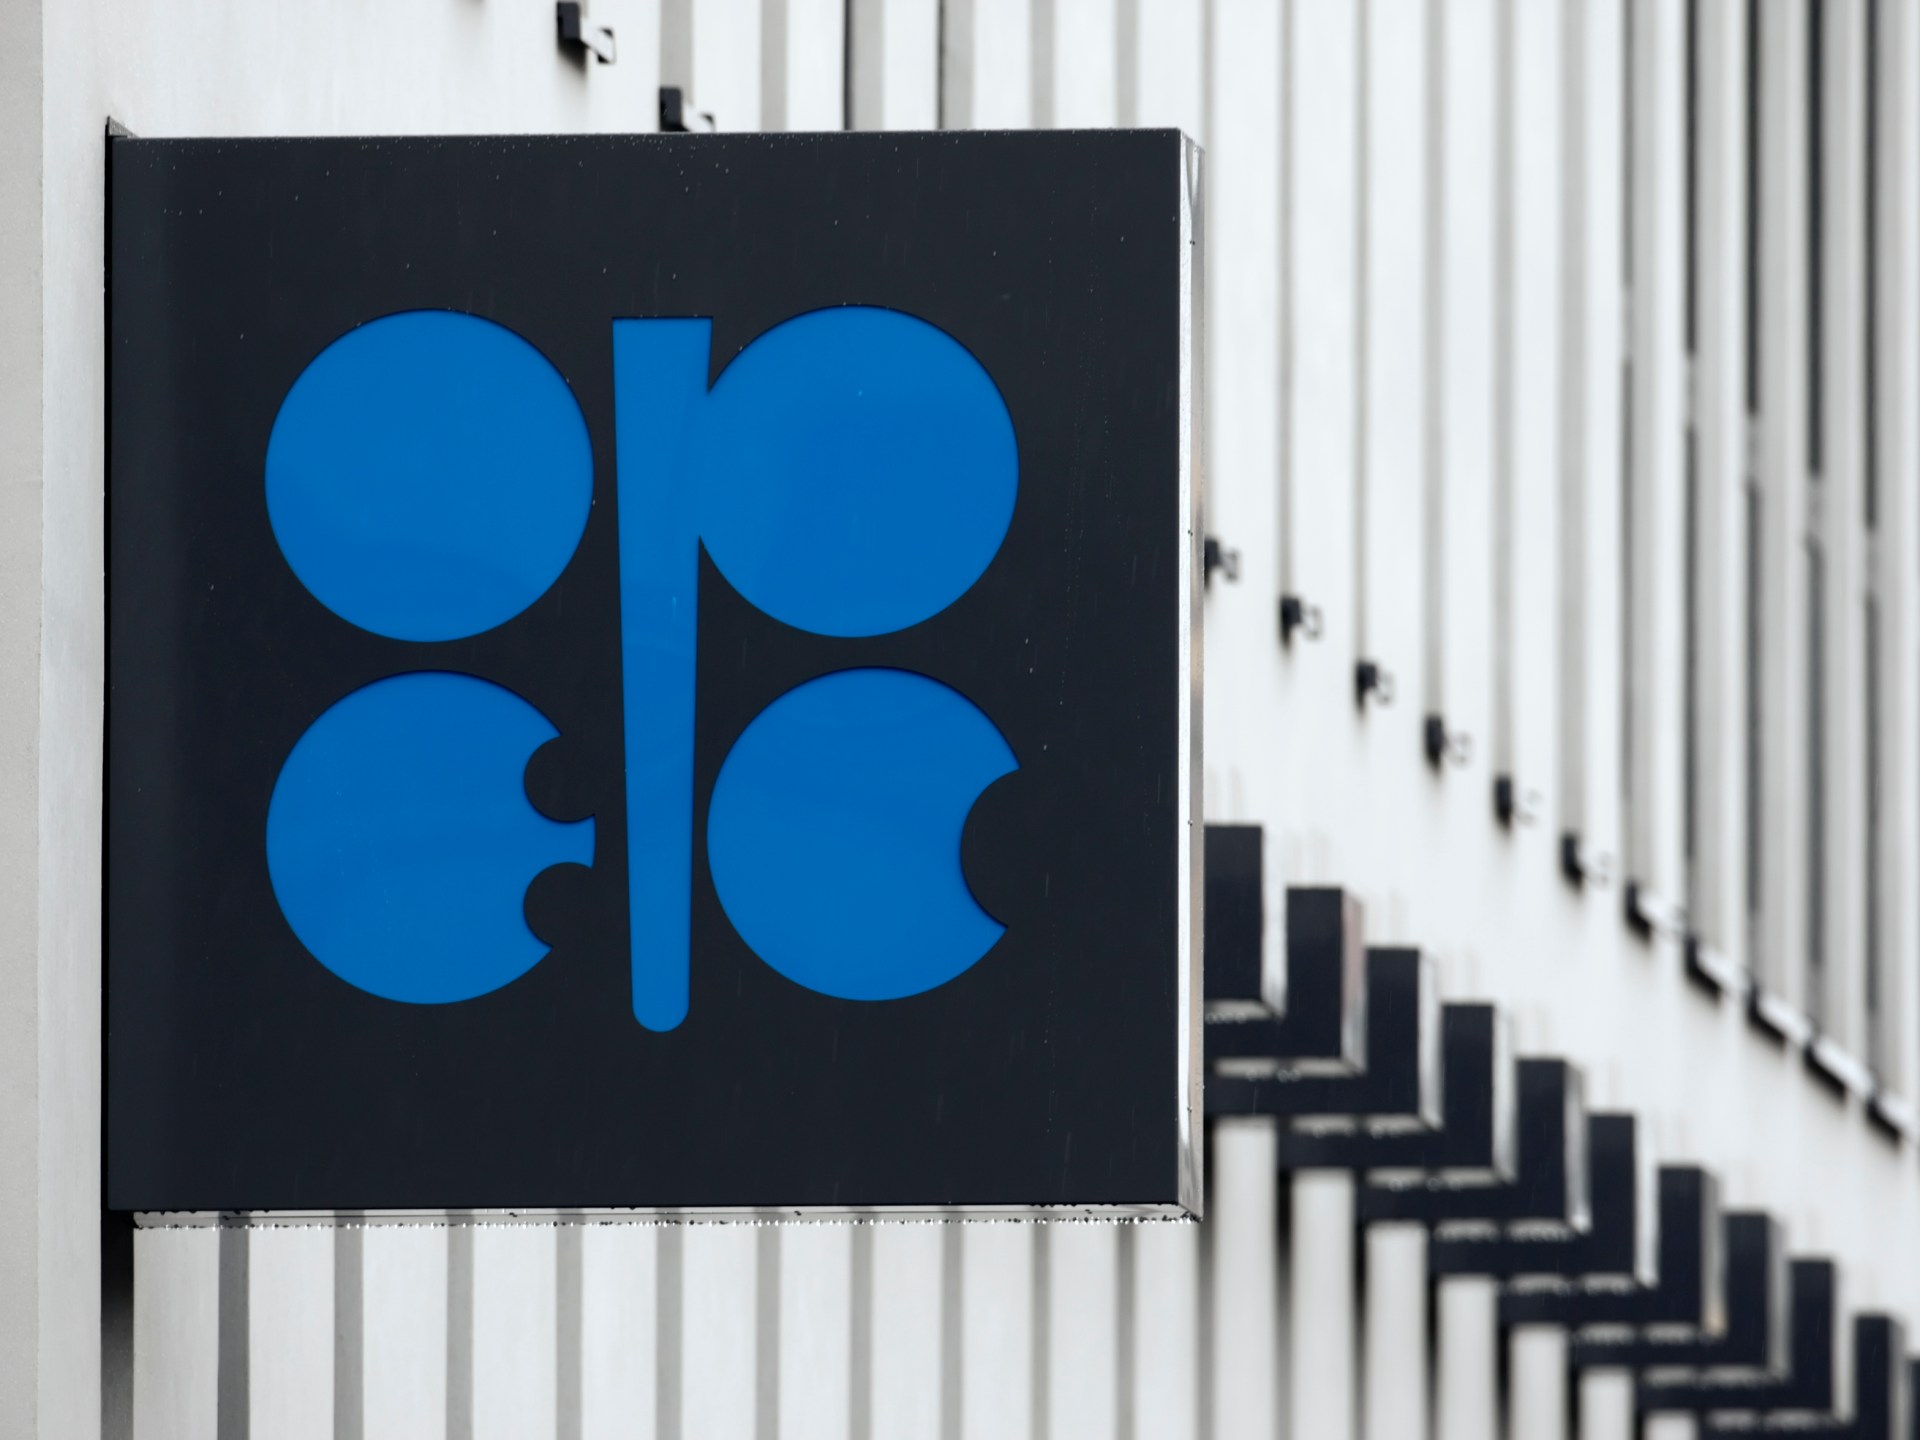 ‘OPEC does not control the price’: OPEC President | OPEC News